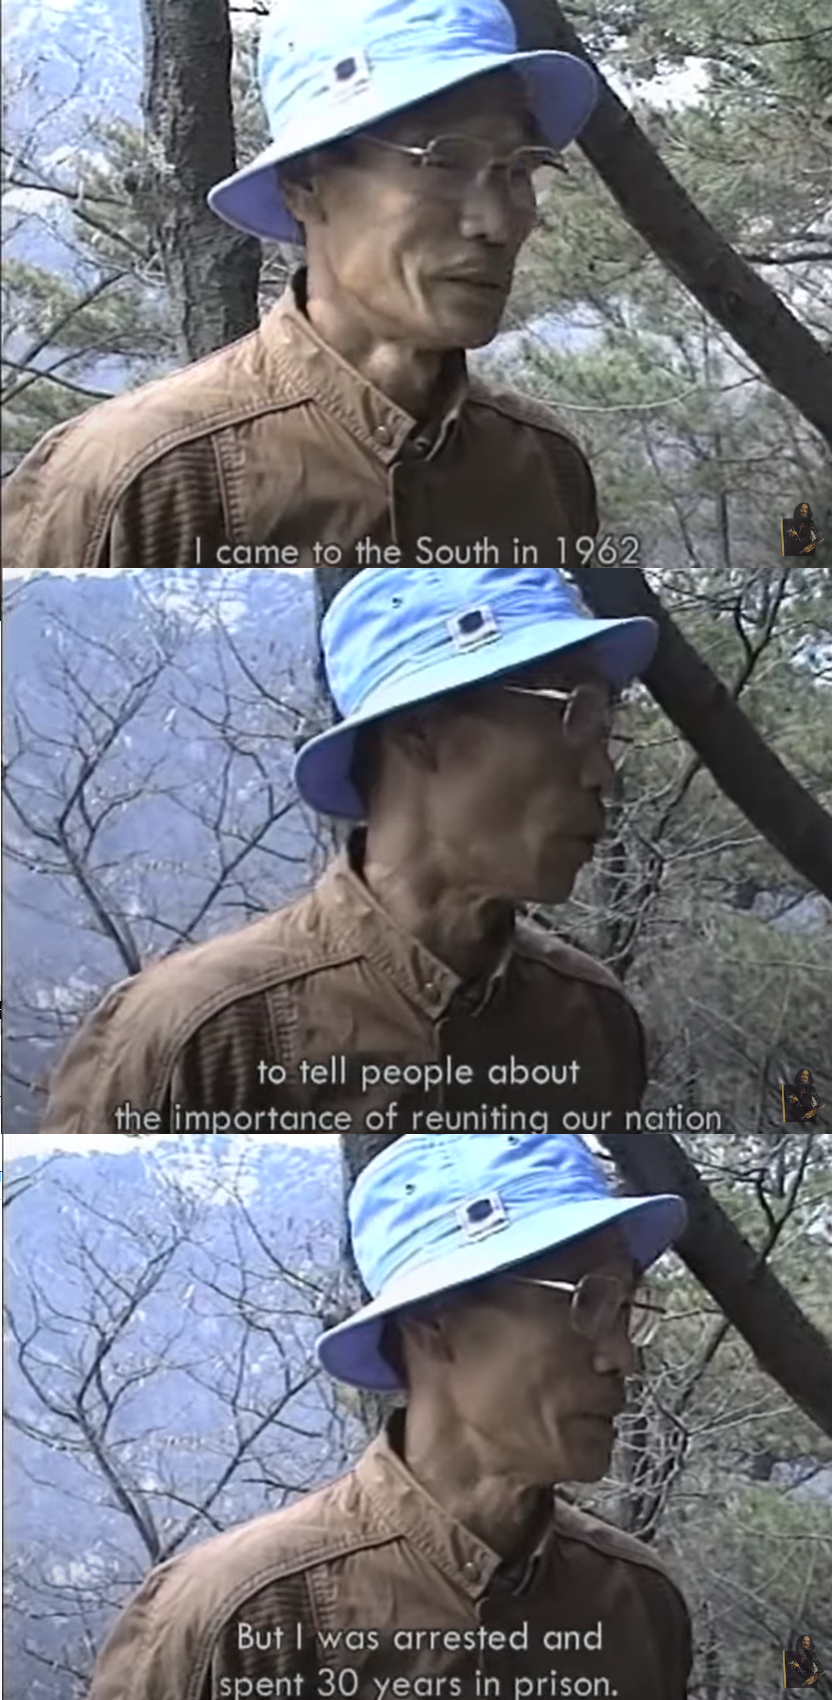 File:Cho Chang-son speaks about his reason for coming to the South in the documentary Repatriation (2003).png